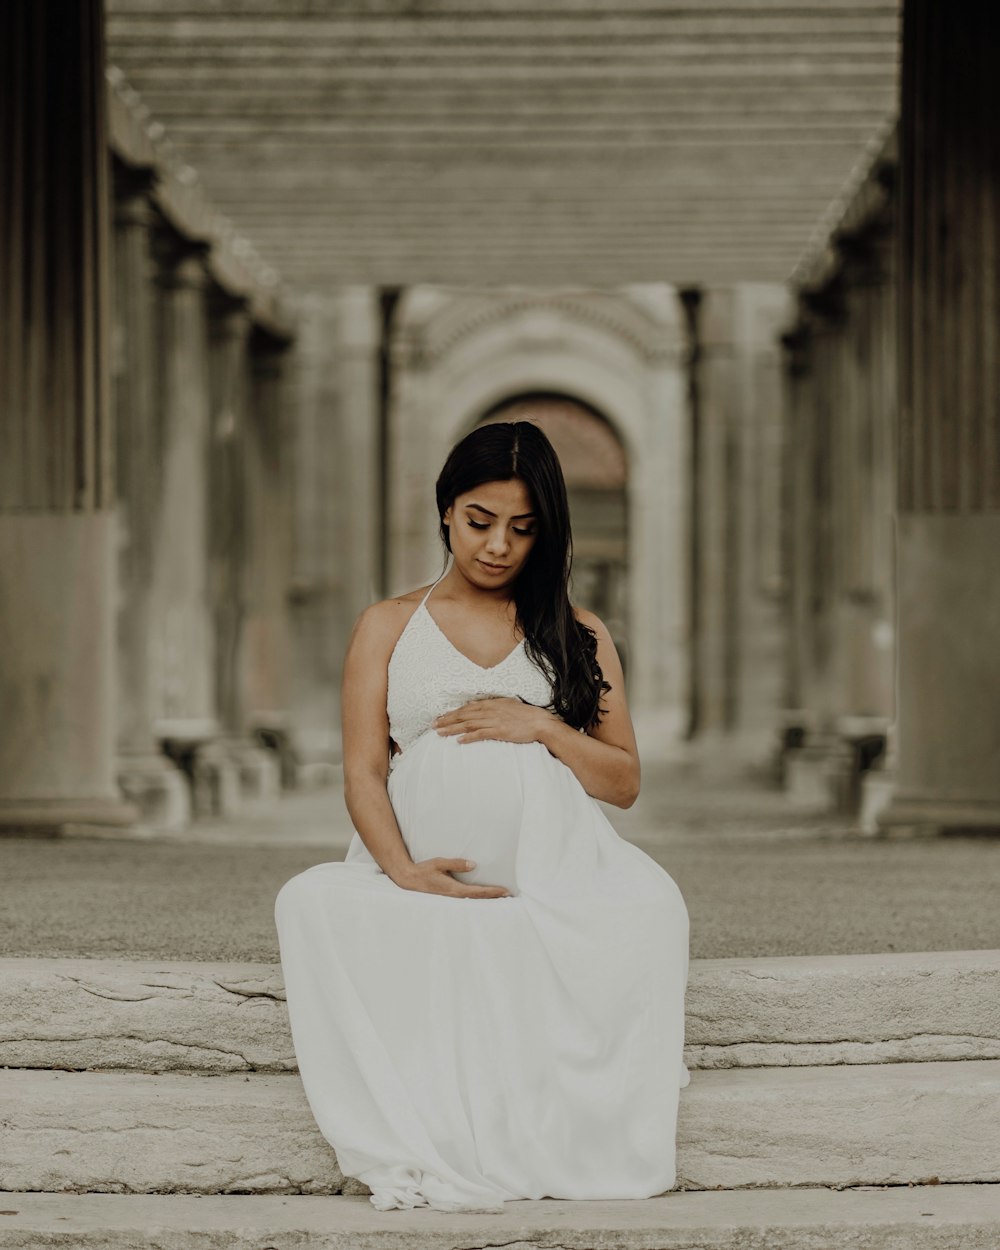 a pregnant woman in a white dress sitting on steps